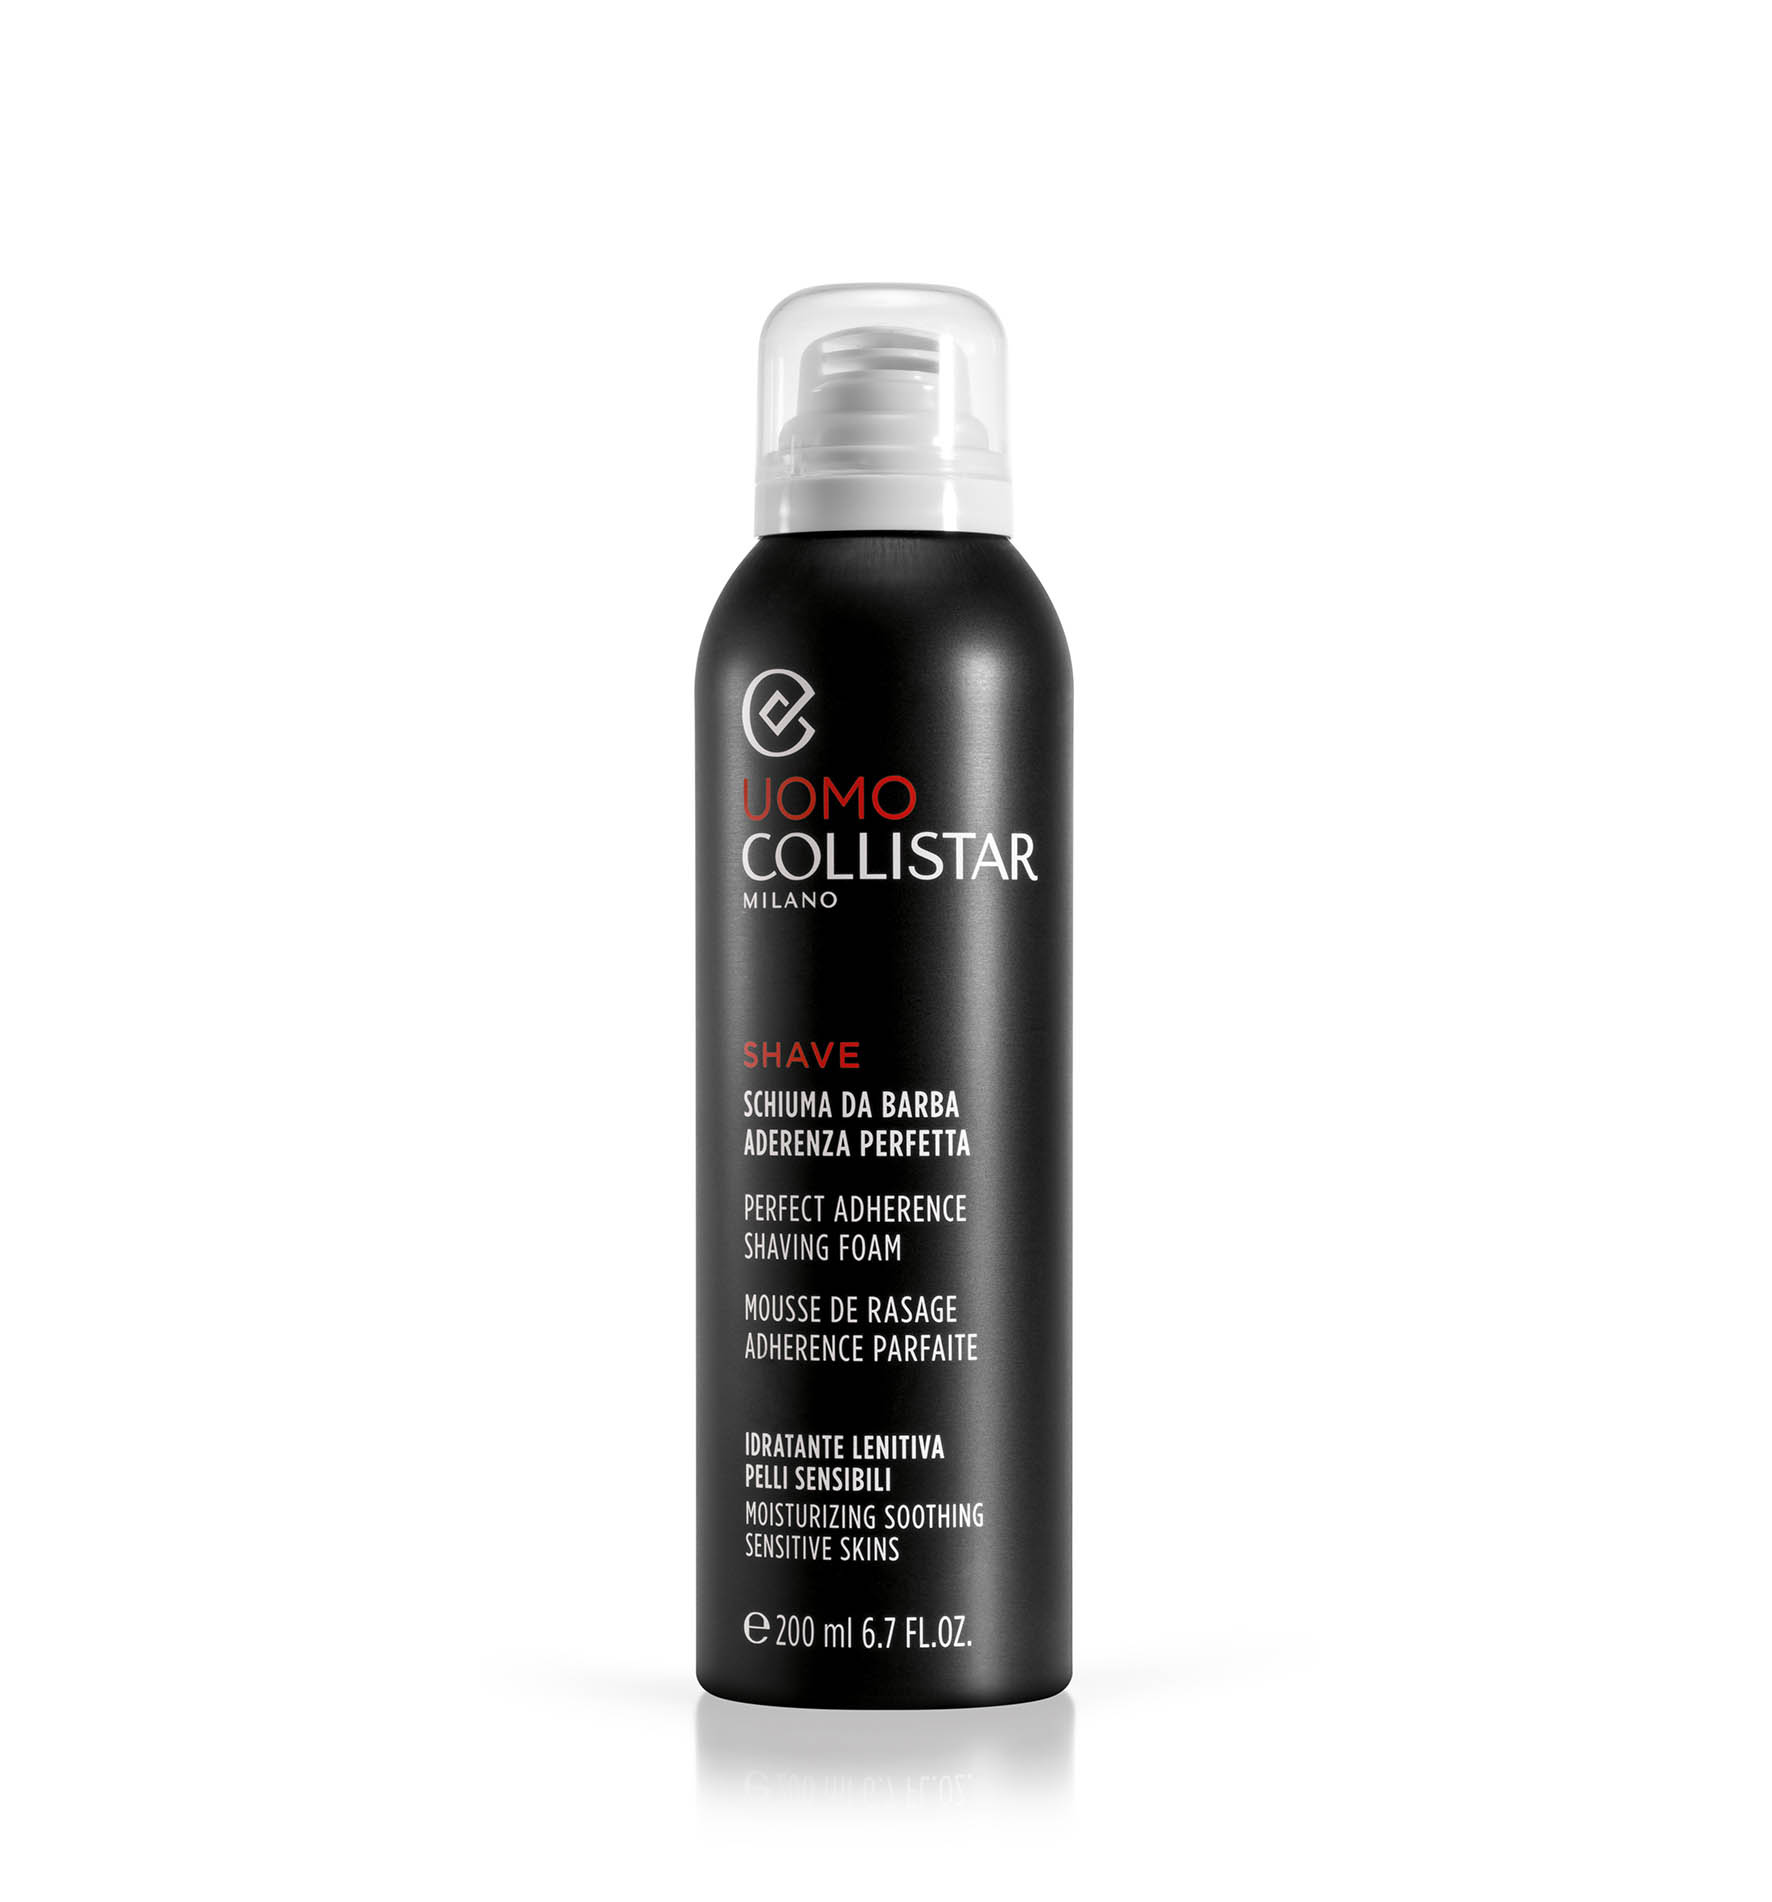 PERFECT ADHERENCE SHAVING FOAM MOISTURIZING SOOTHING SENSITIVE SKIN | Collistar - Shop Online Ufficiale